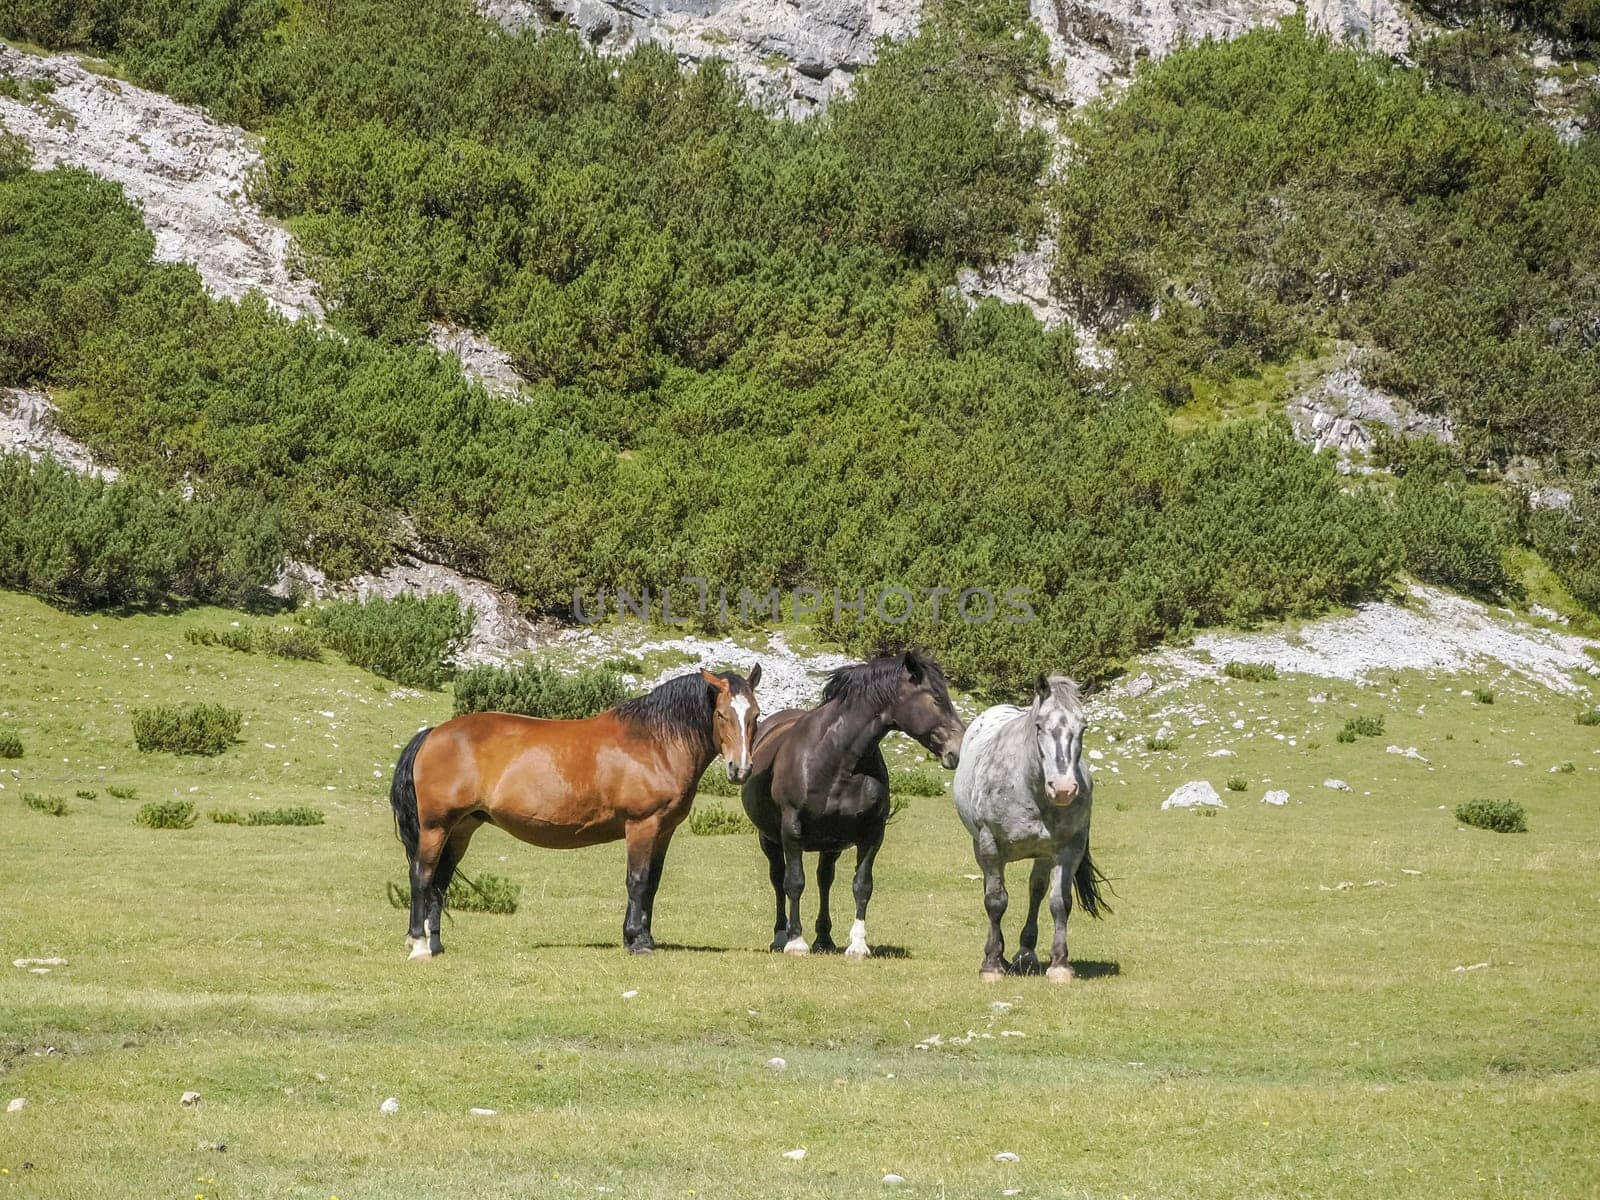 horses on grass in dolomites mountains background panorama